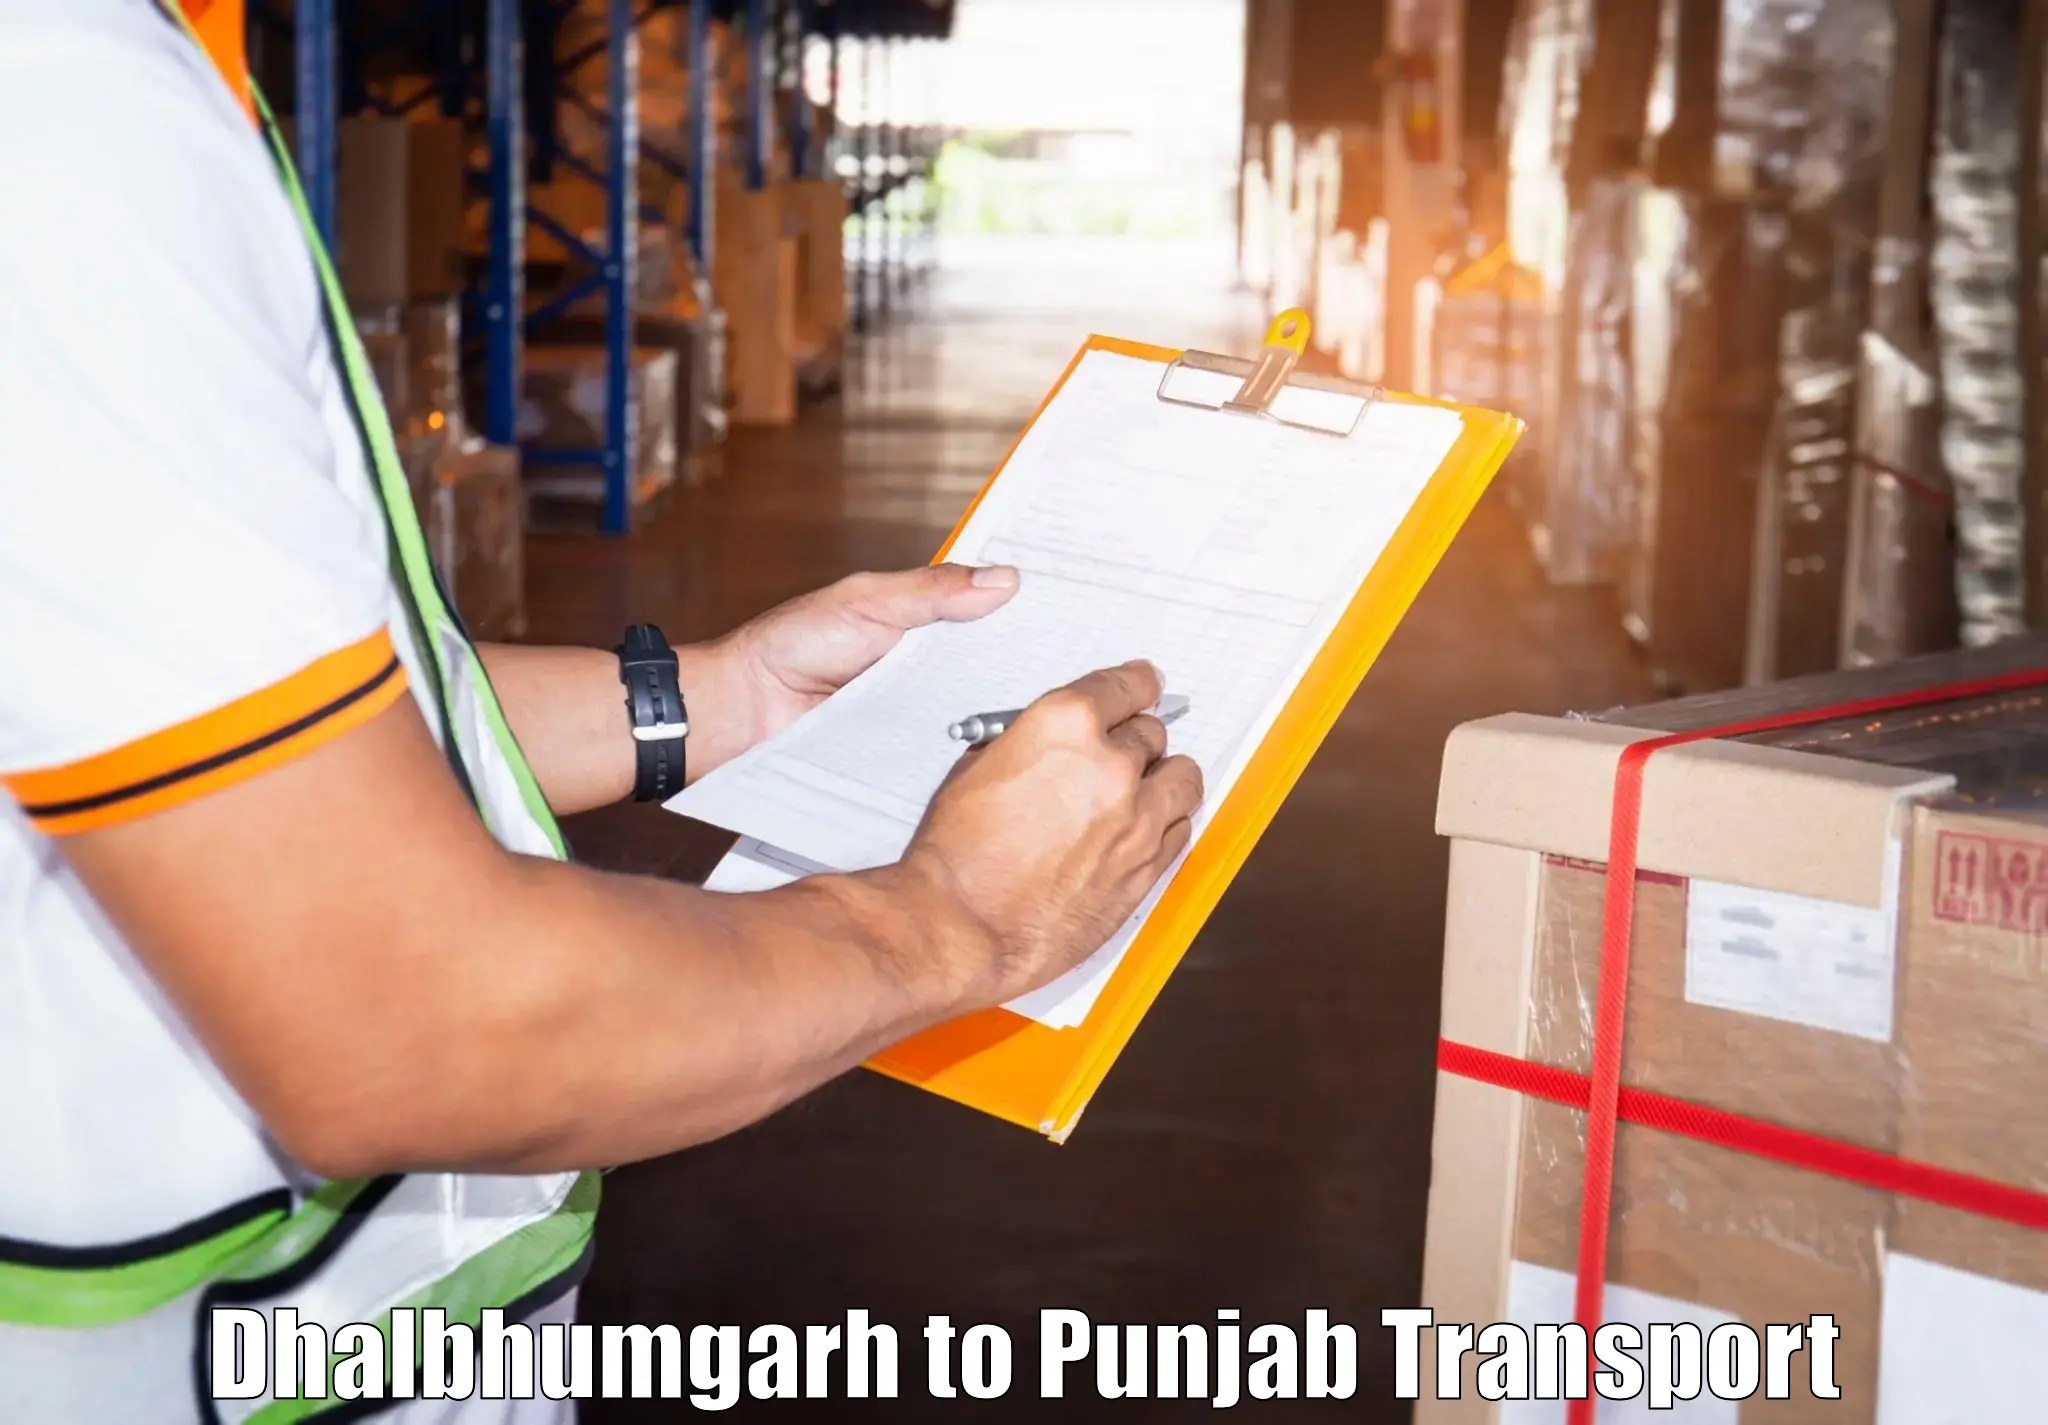 Part load transport service in India Dhalbhumgarh to Punjab